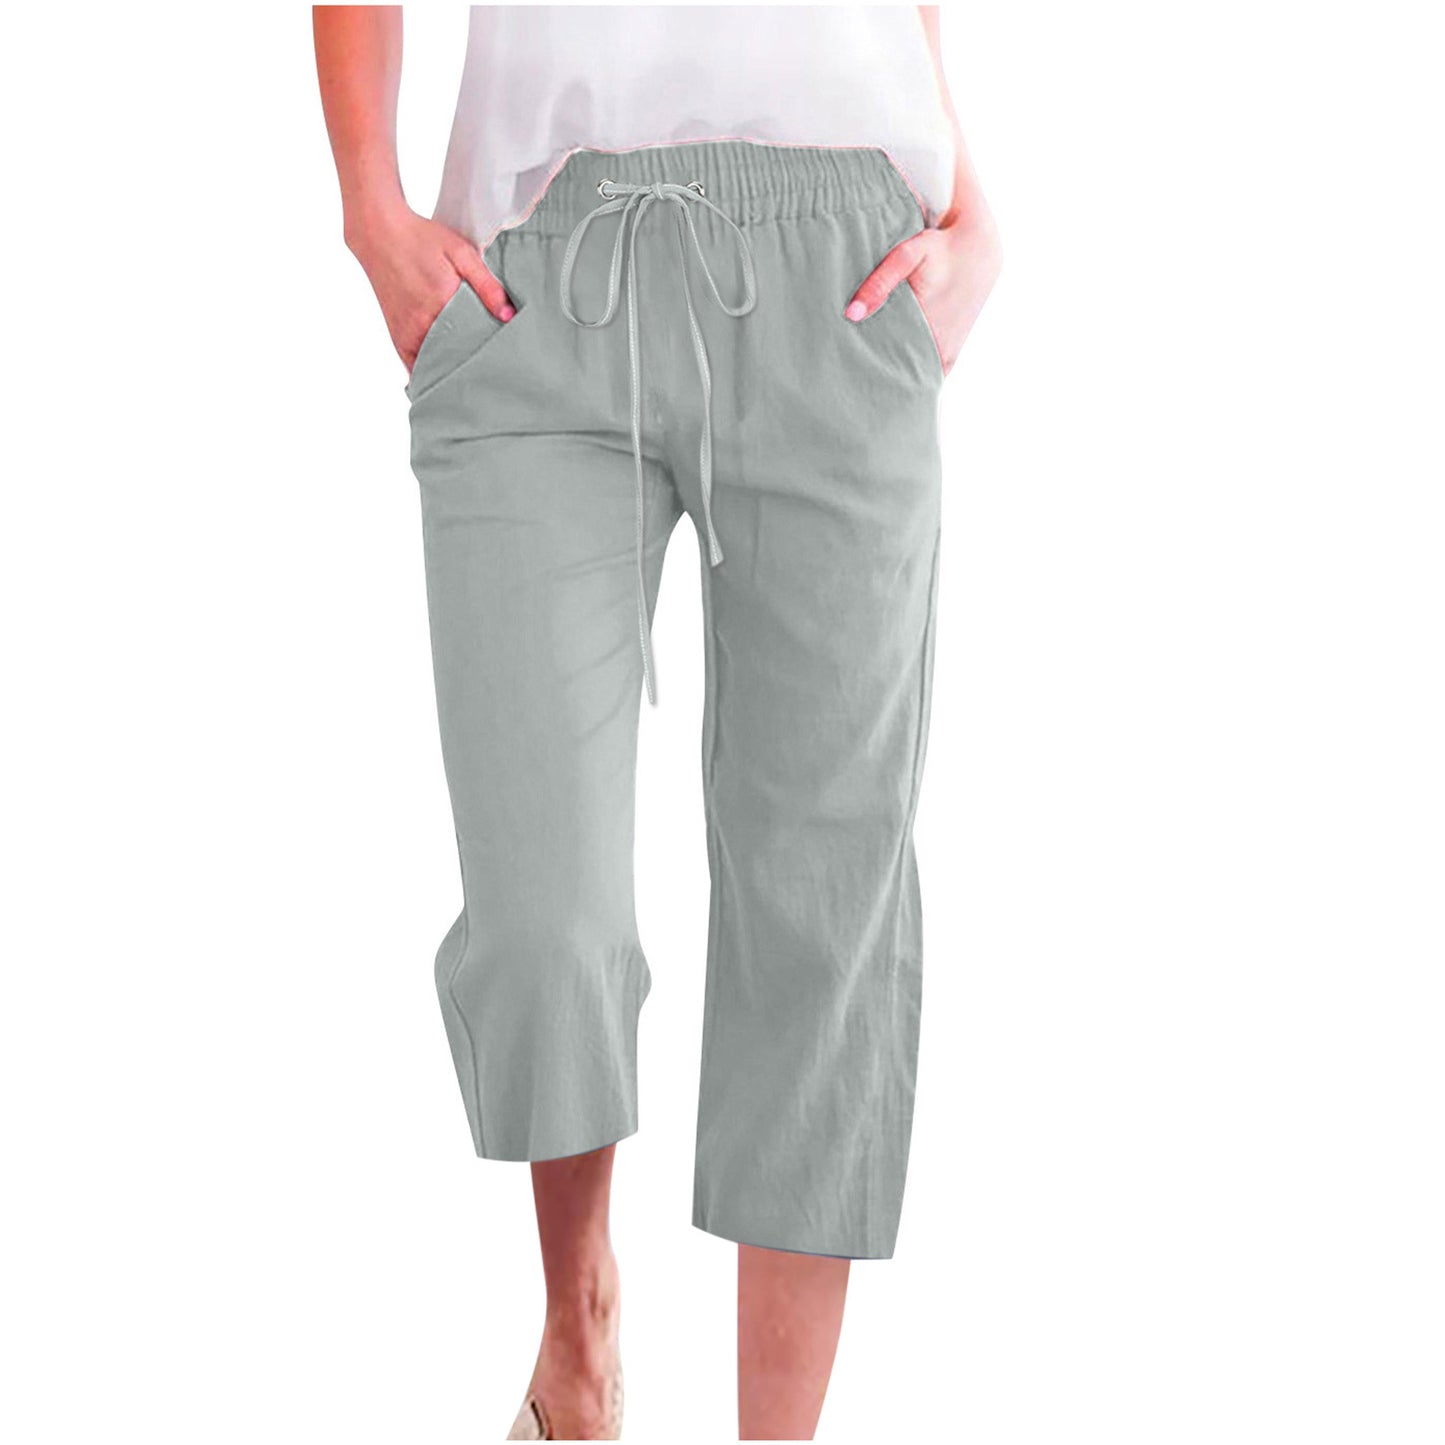 Women's Solid Color Drawstring Cotton And Linen Casual Loose Straight Pocket Home Cropped Pants